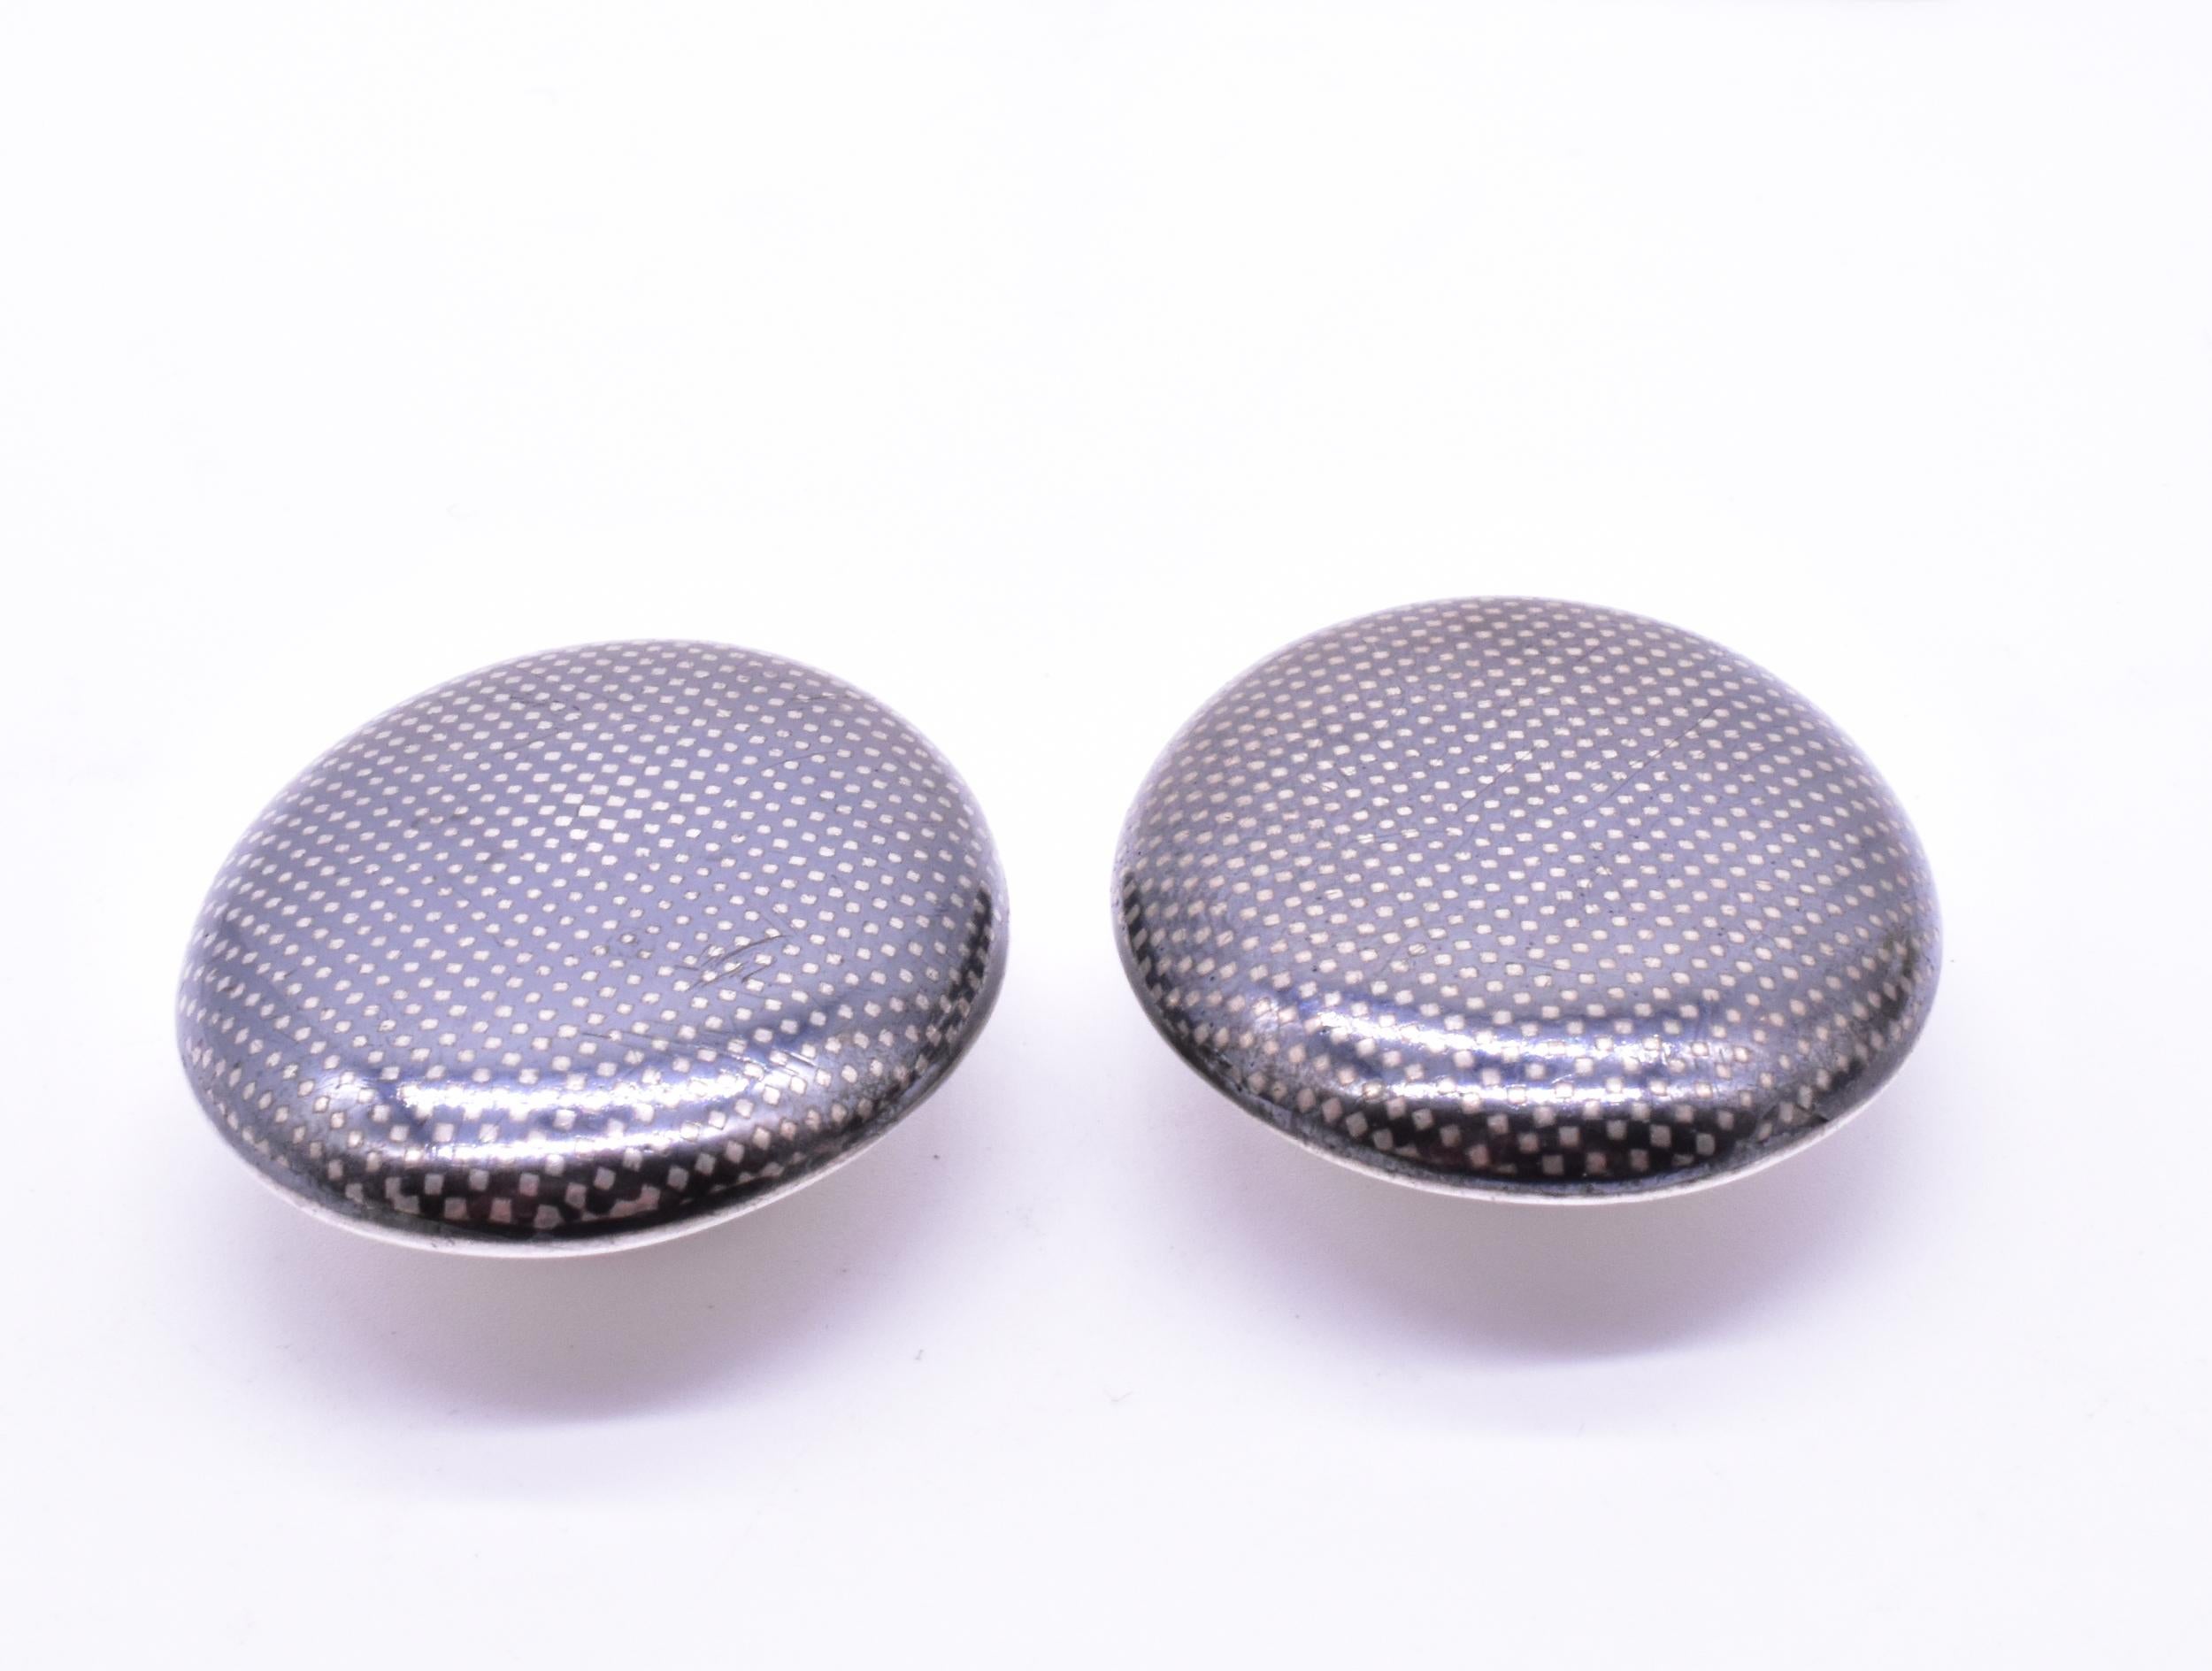 We love the pleasing niello design of the dotted squares on these substantial cufflinks. The word 